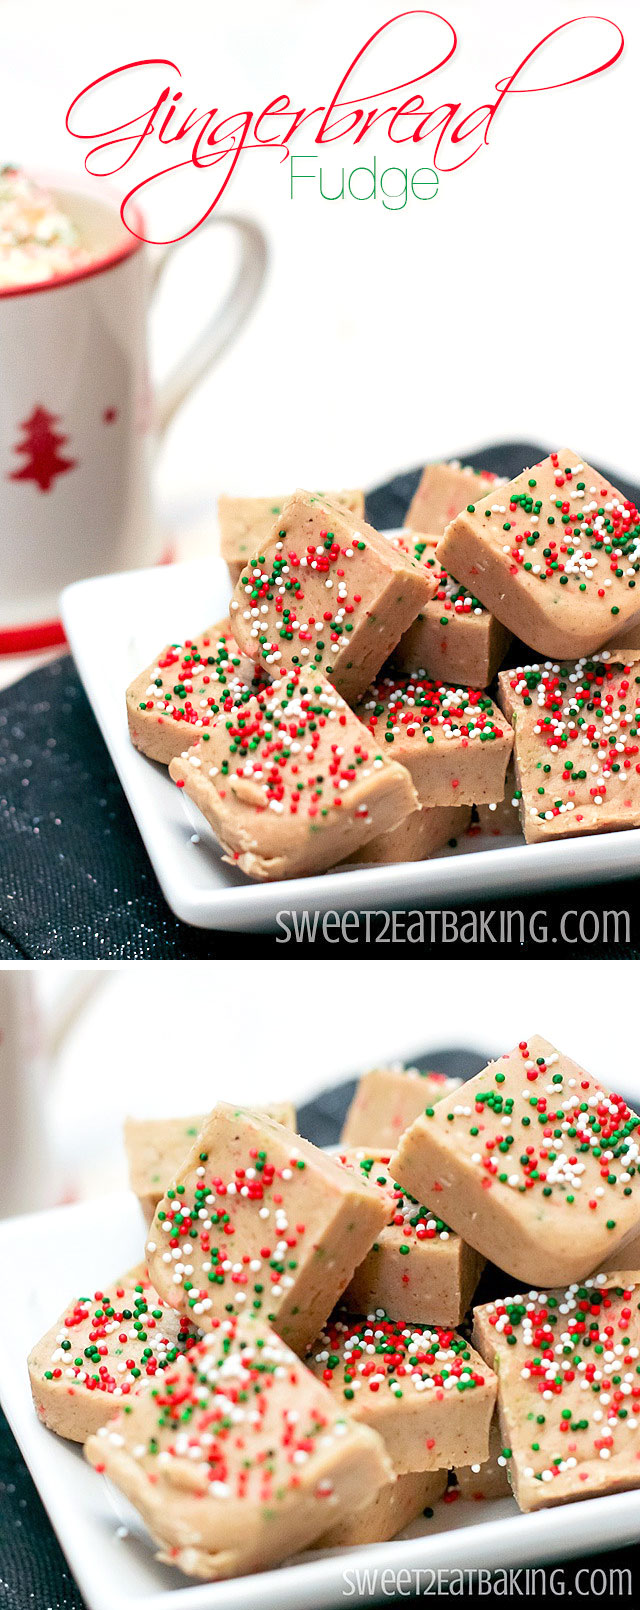 Gingerbread Fudge Recipe by Sweet2EatBaking.com | This quick and easy gingerbread fudge recipe is perfectly spiced and festive. You'll love how rich, creamy and crunchy this fudge is thanks to the festive Christmas sprinkles.